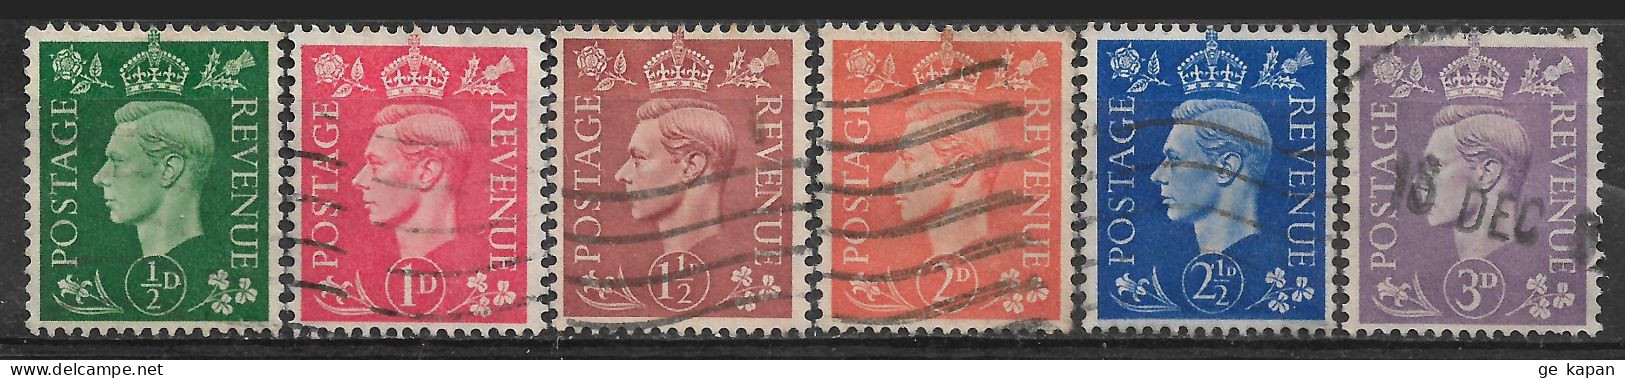 1941-1942 GREAT BRITAIN Complete Set Of 6 Used Stamps (Scott # 258-263) CV $3.30 - Used Stamps